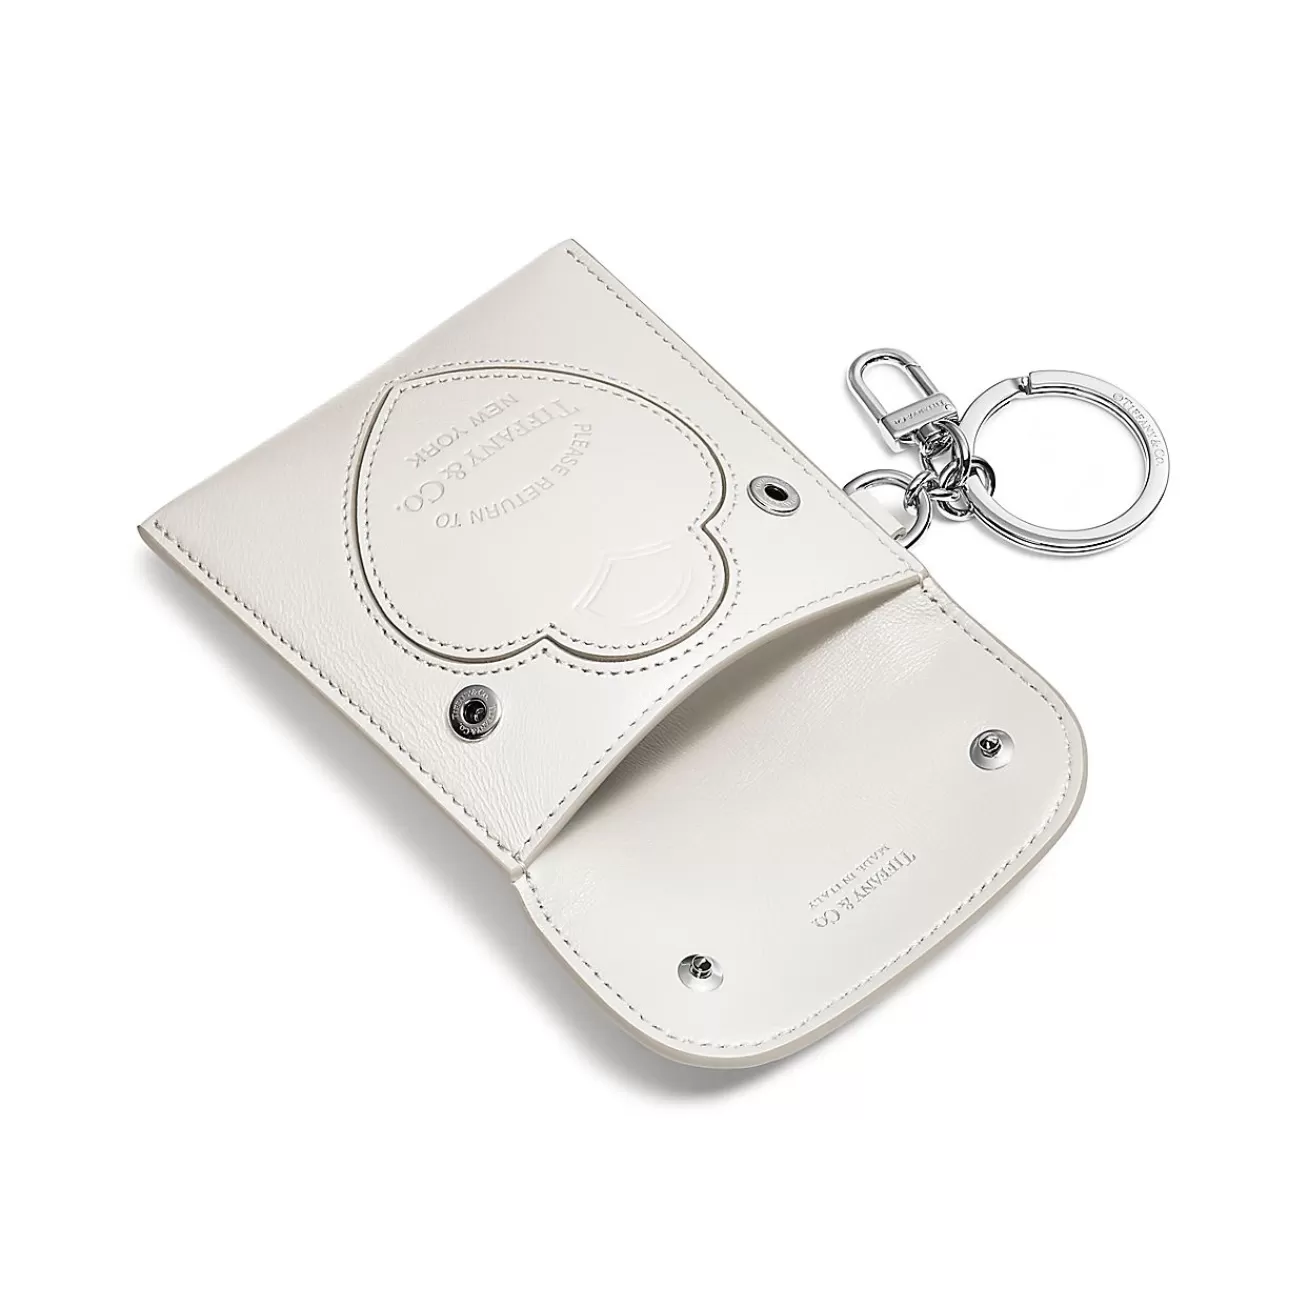 Tiffany & Co. Return to Tiffany® Pouch Bag Charm in Ivory Leather | ^Women Business Gifts | Small Leather Goods